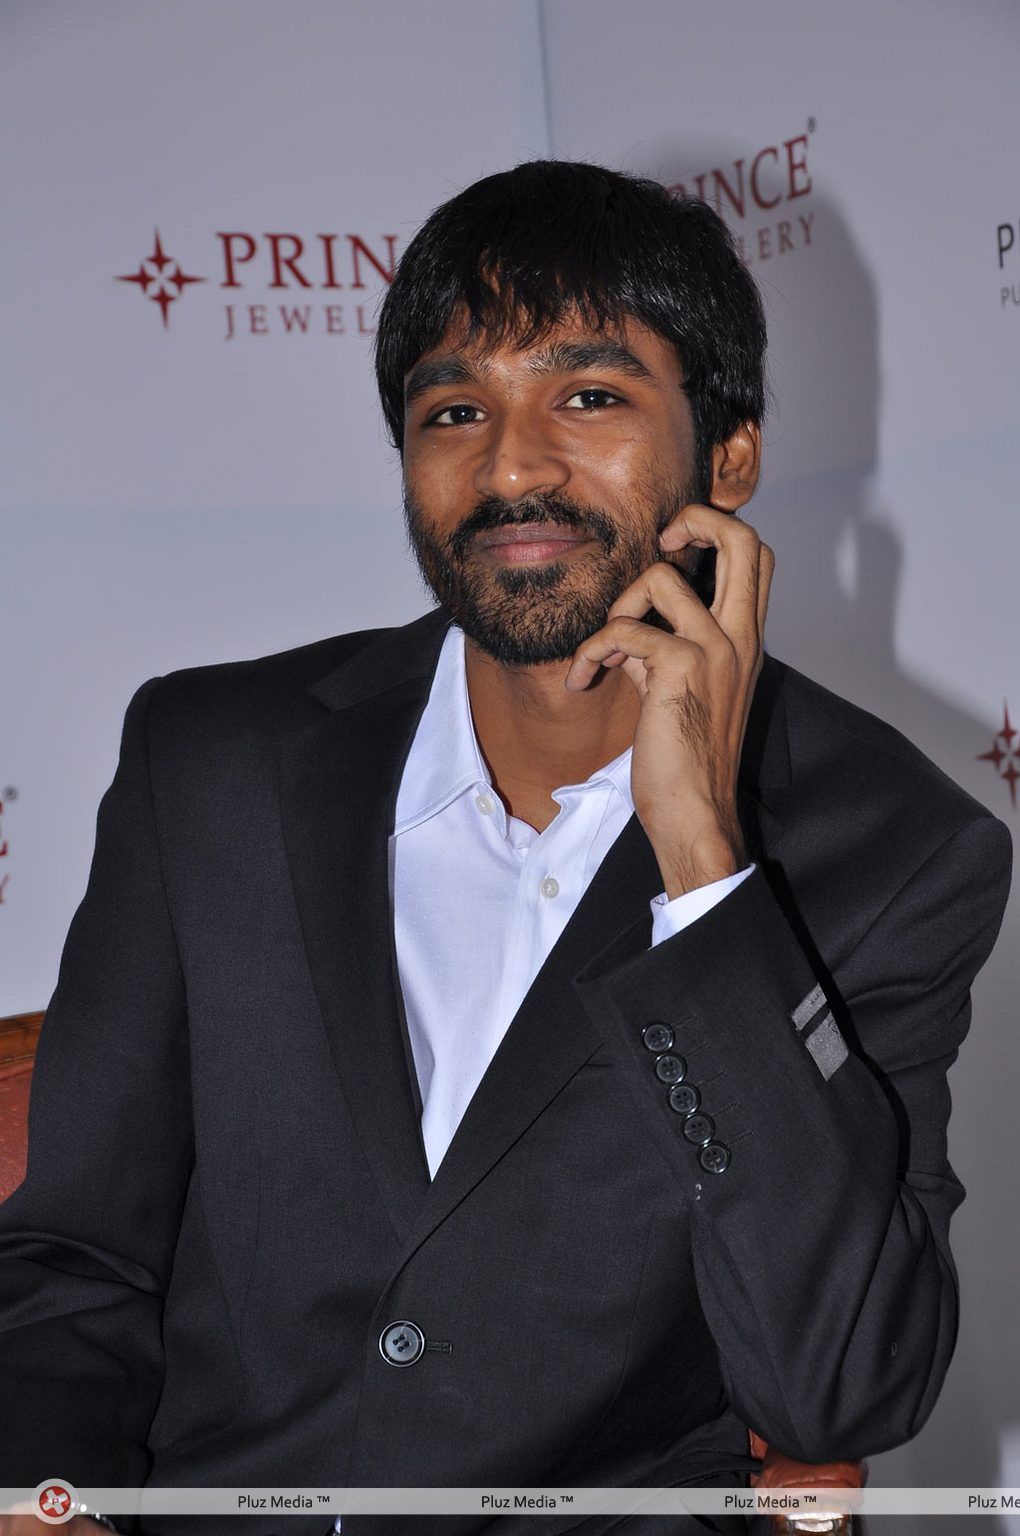 Dhanush - Aishwarya and Dhanush unveil Prince Jewellery's Platinum - Pictures | Picture 139405